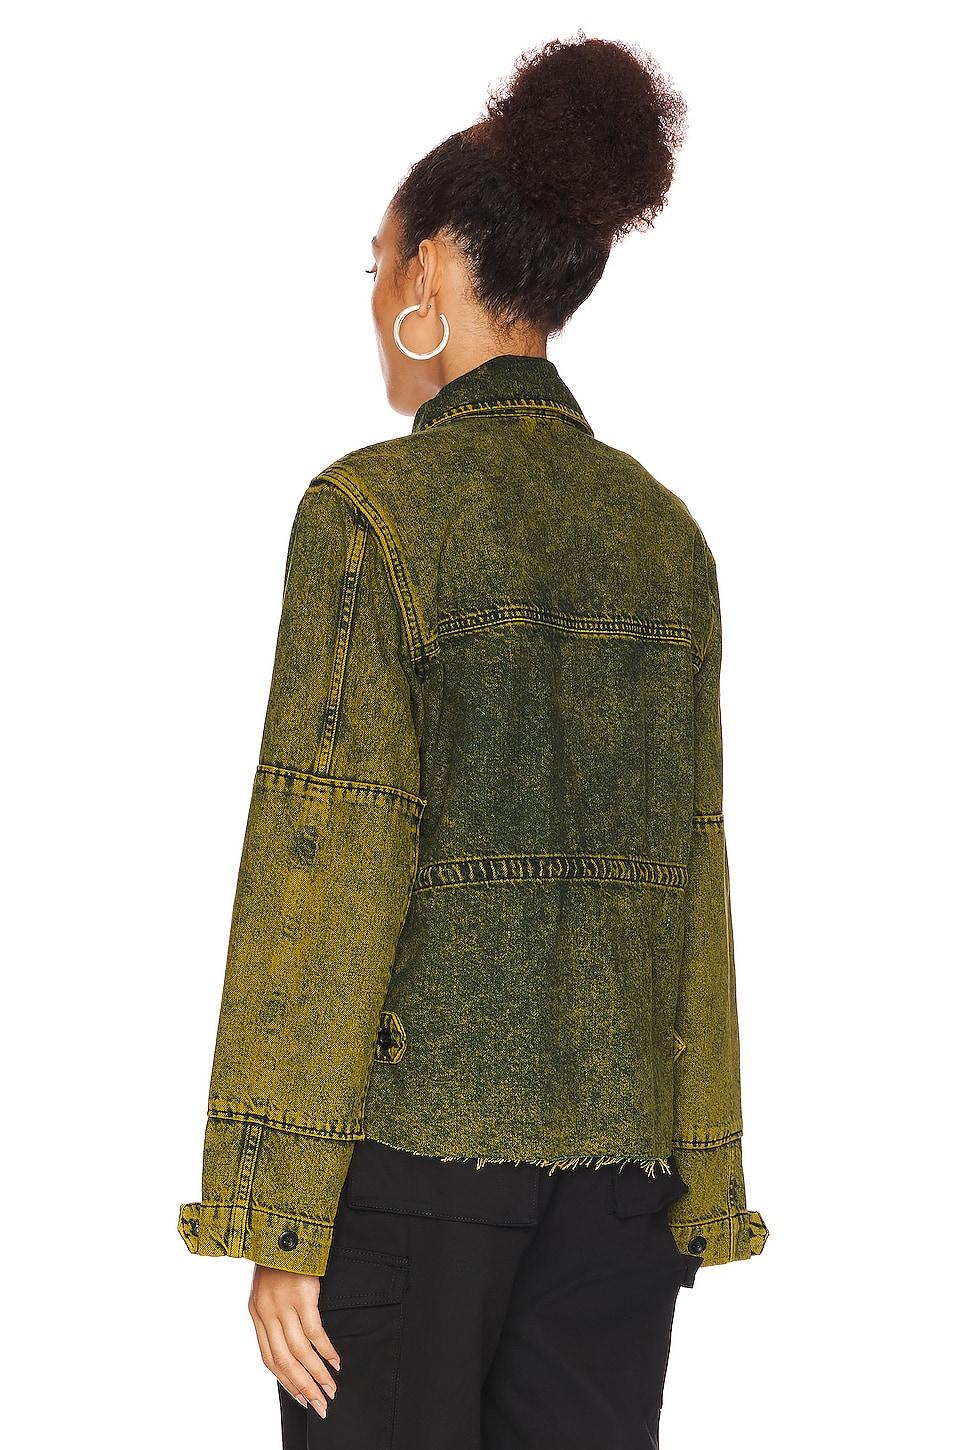 AllSaints Finch Embroidered Utility Jacket